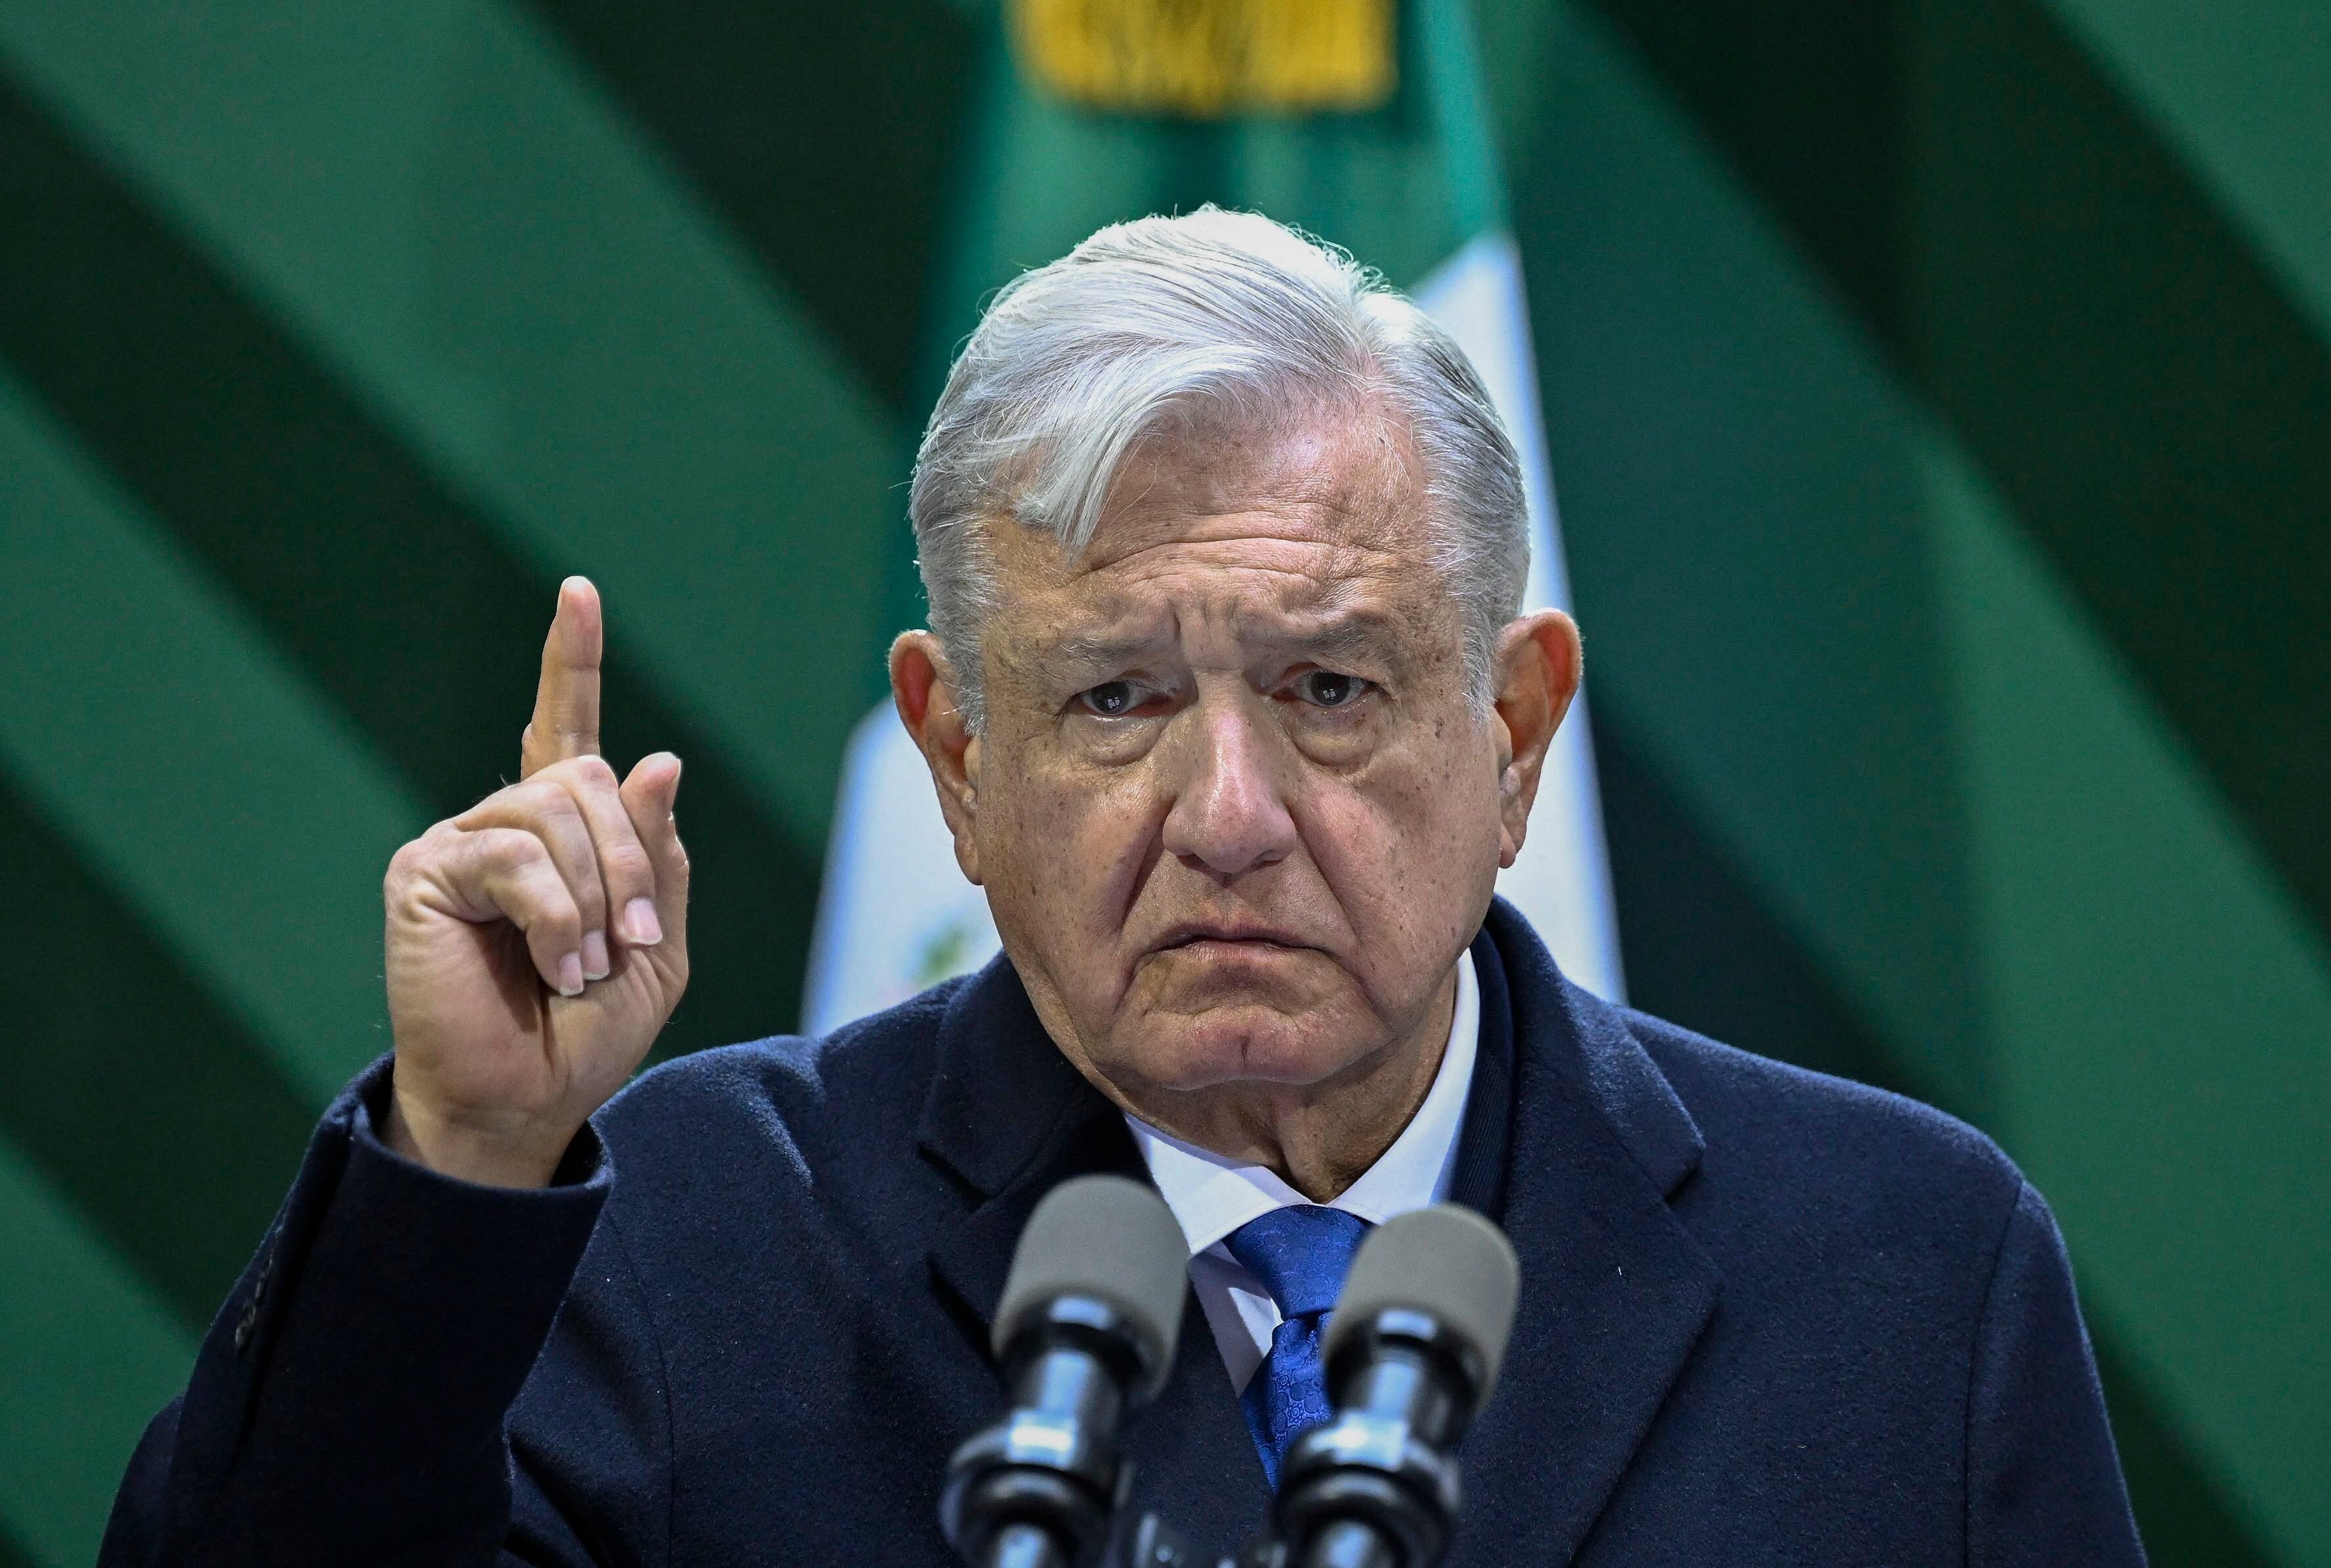 Persistent inflation in Mexico “is not cause for alarm,” says López Obrador